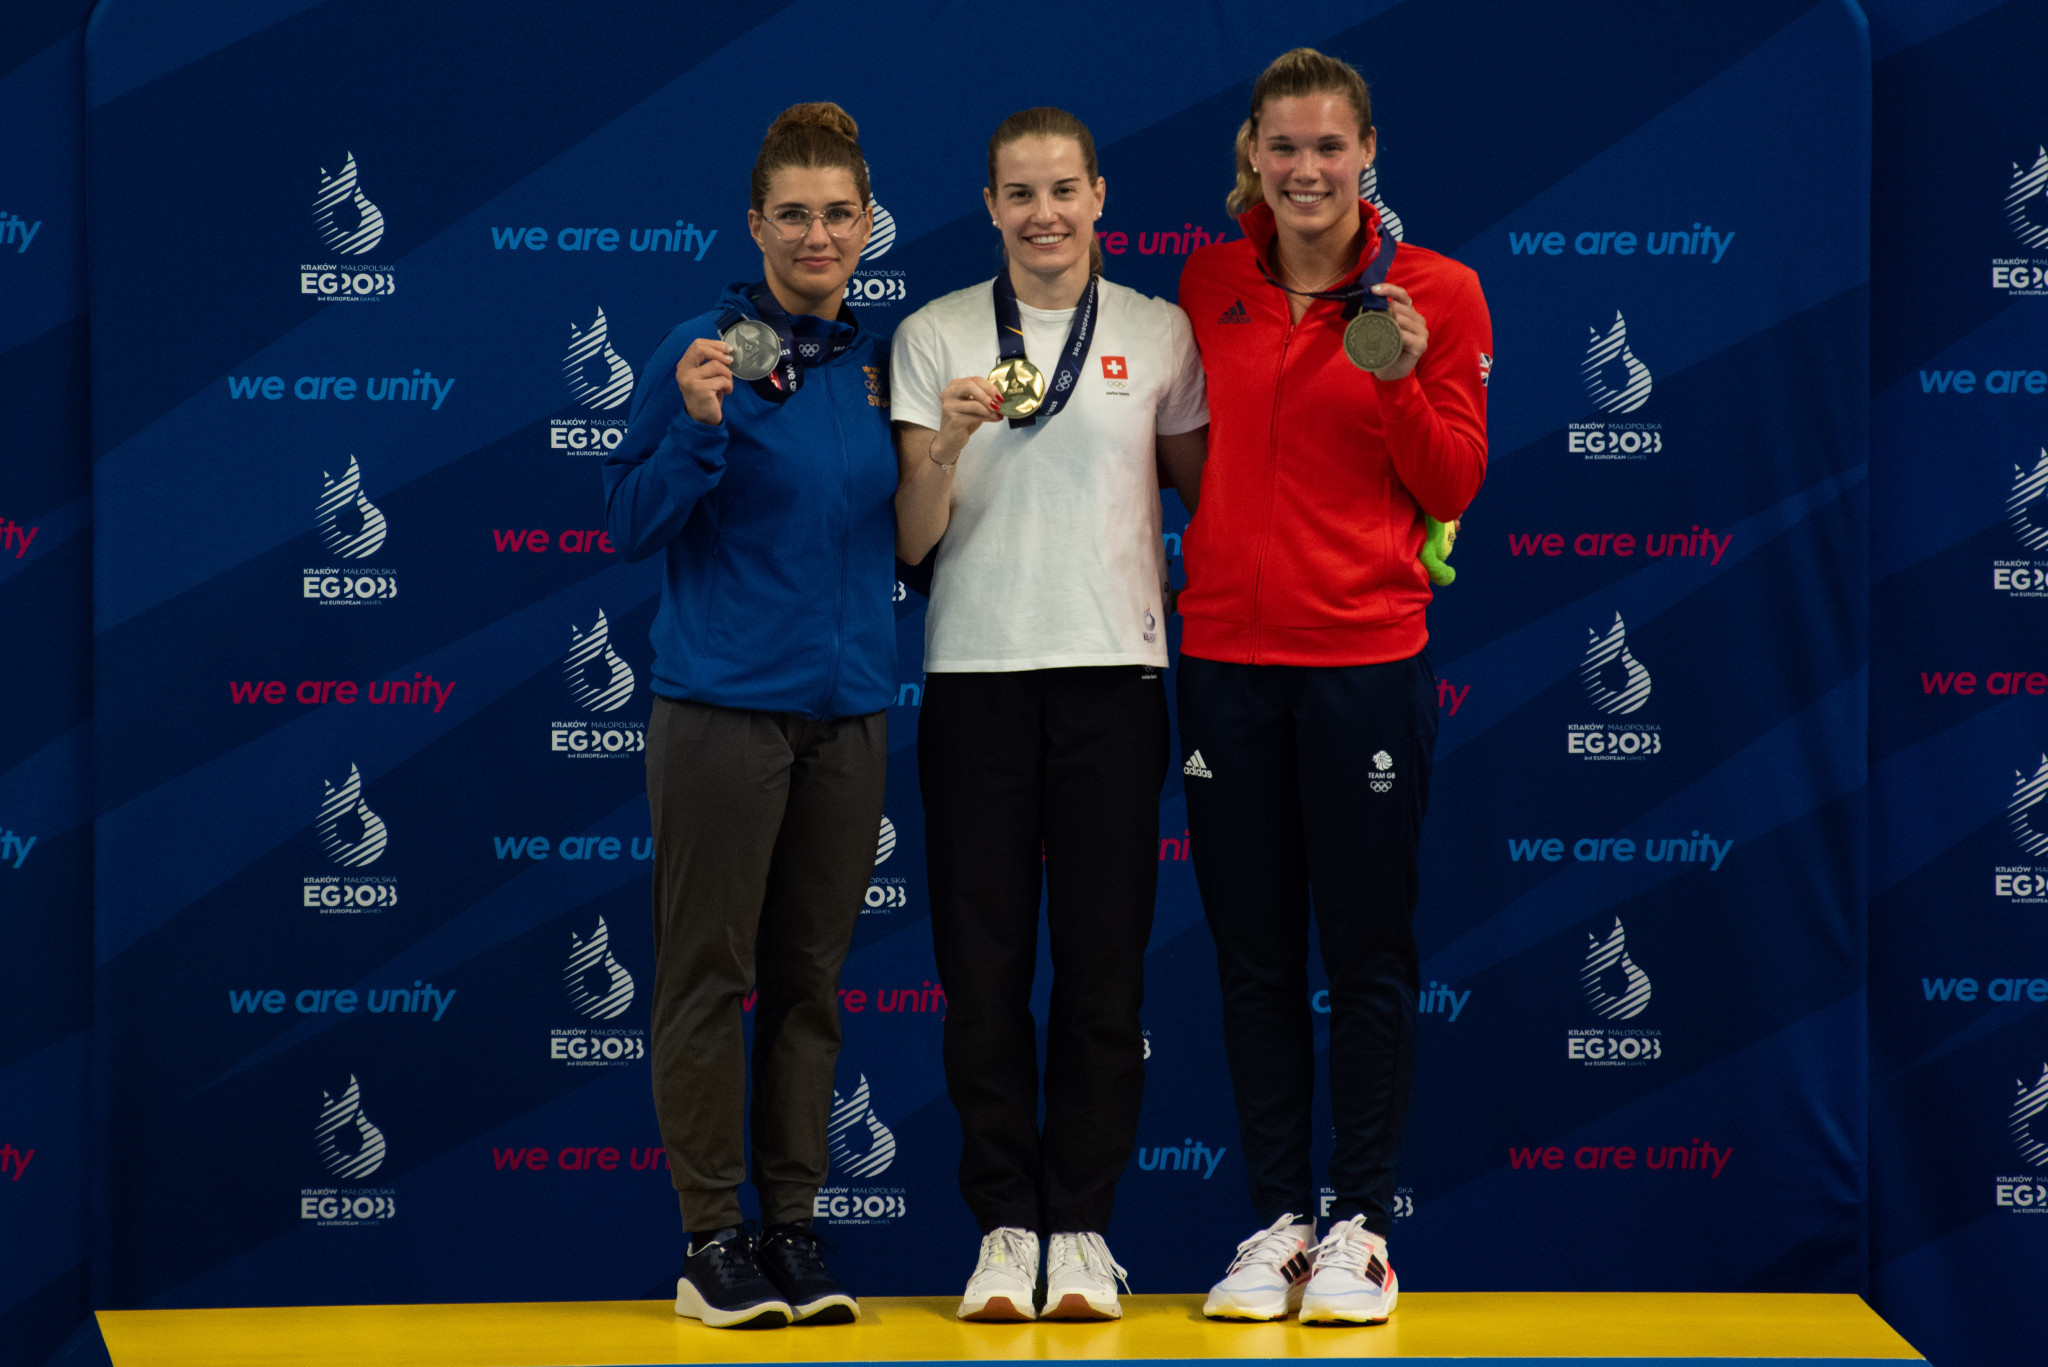 Michelle Heimberg, centre, claimed a dramatic success for Switzerland in the women's 1m springboard by just 0.15 points ahead of Sweden's Emilia Nilsson Garip, left ©Kraków-Małopolska 2023